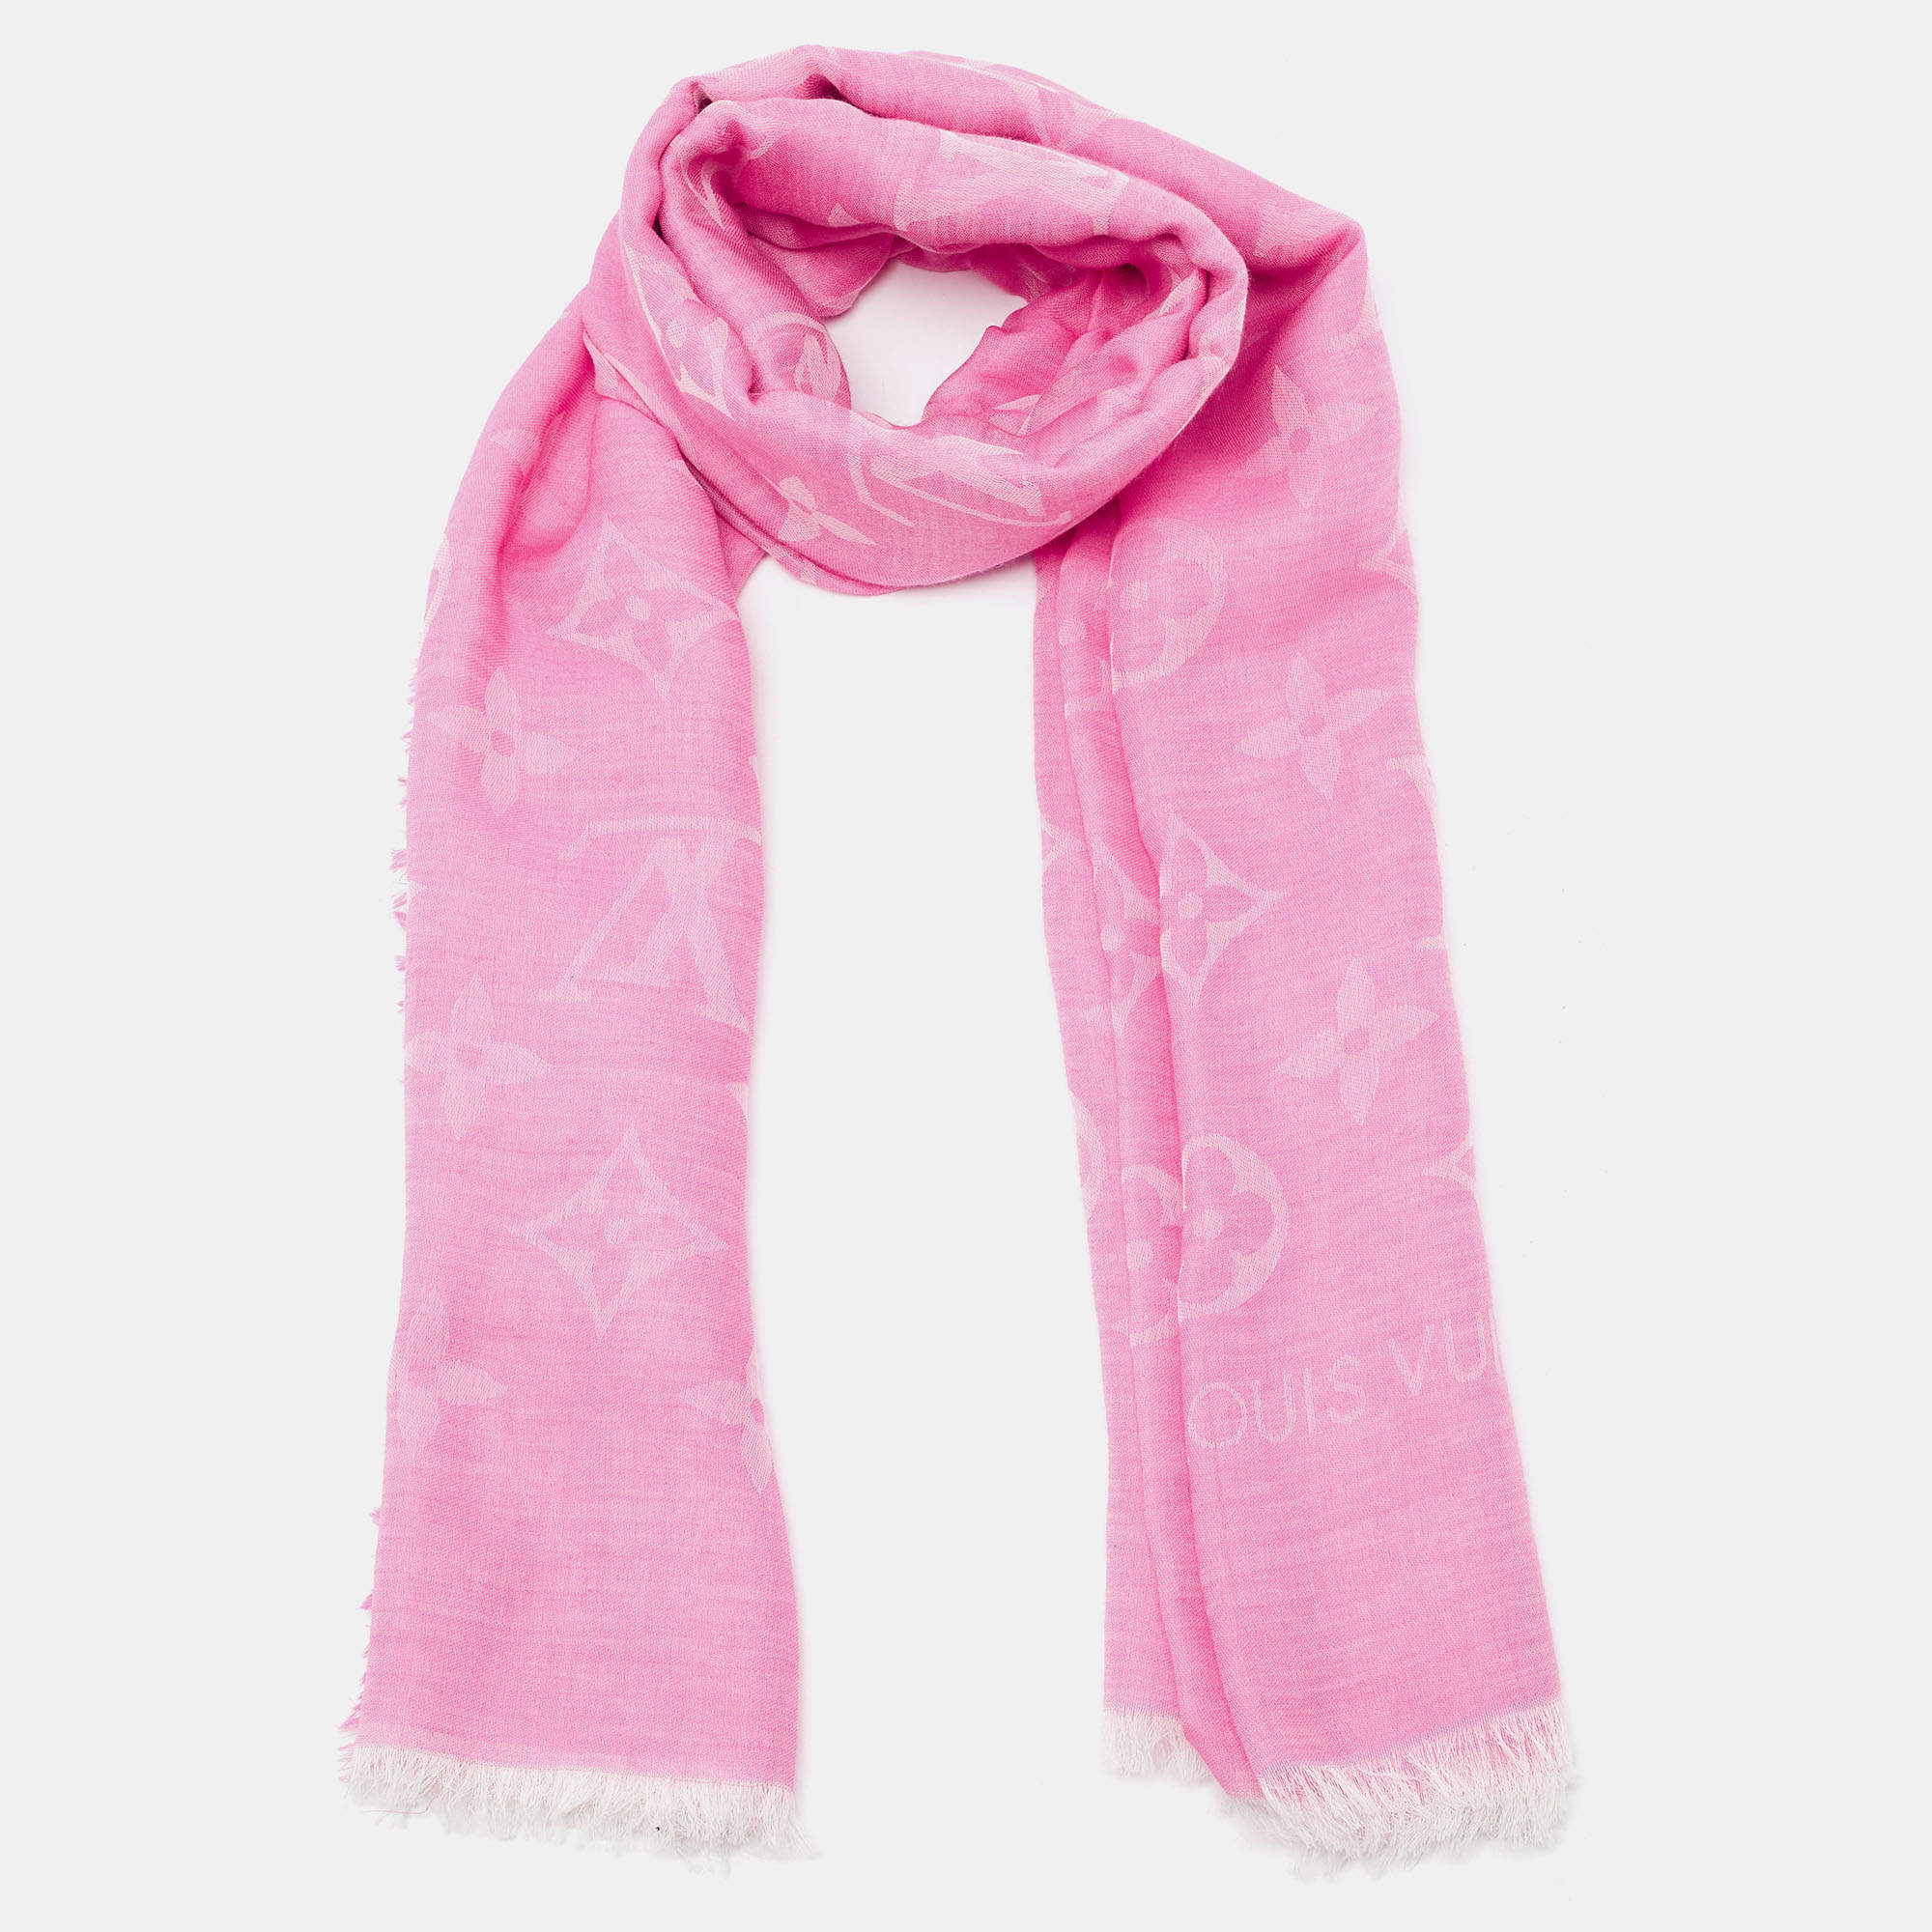 Louis Vuitton Daily Monogram Stole Scarf Wool Silk And Cotton